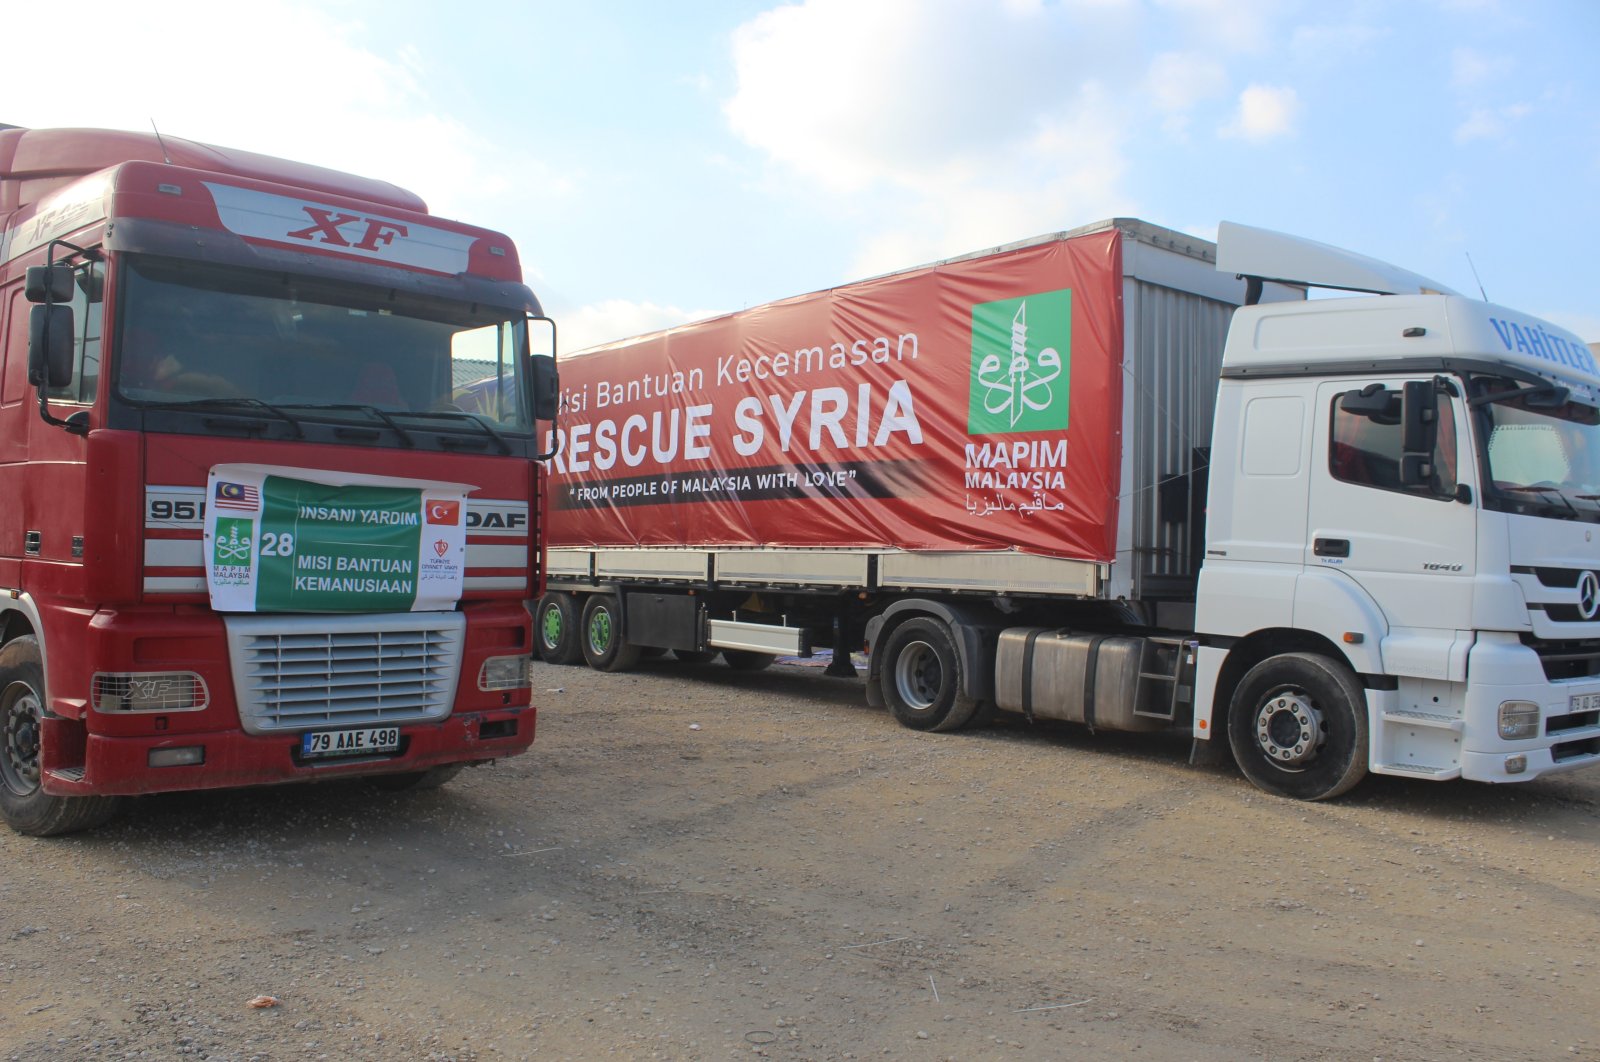 Trucks full of aid sent by the Türkiye Diyanet Foundation (TDV) and the Malaysian Consultative Council for Islamic Organization to Syria, Dec. 9, 2020. (AA Photo)